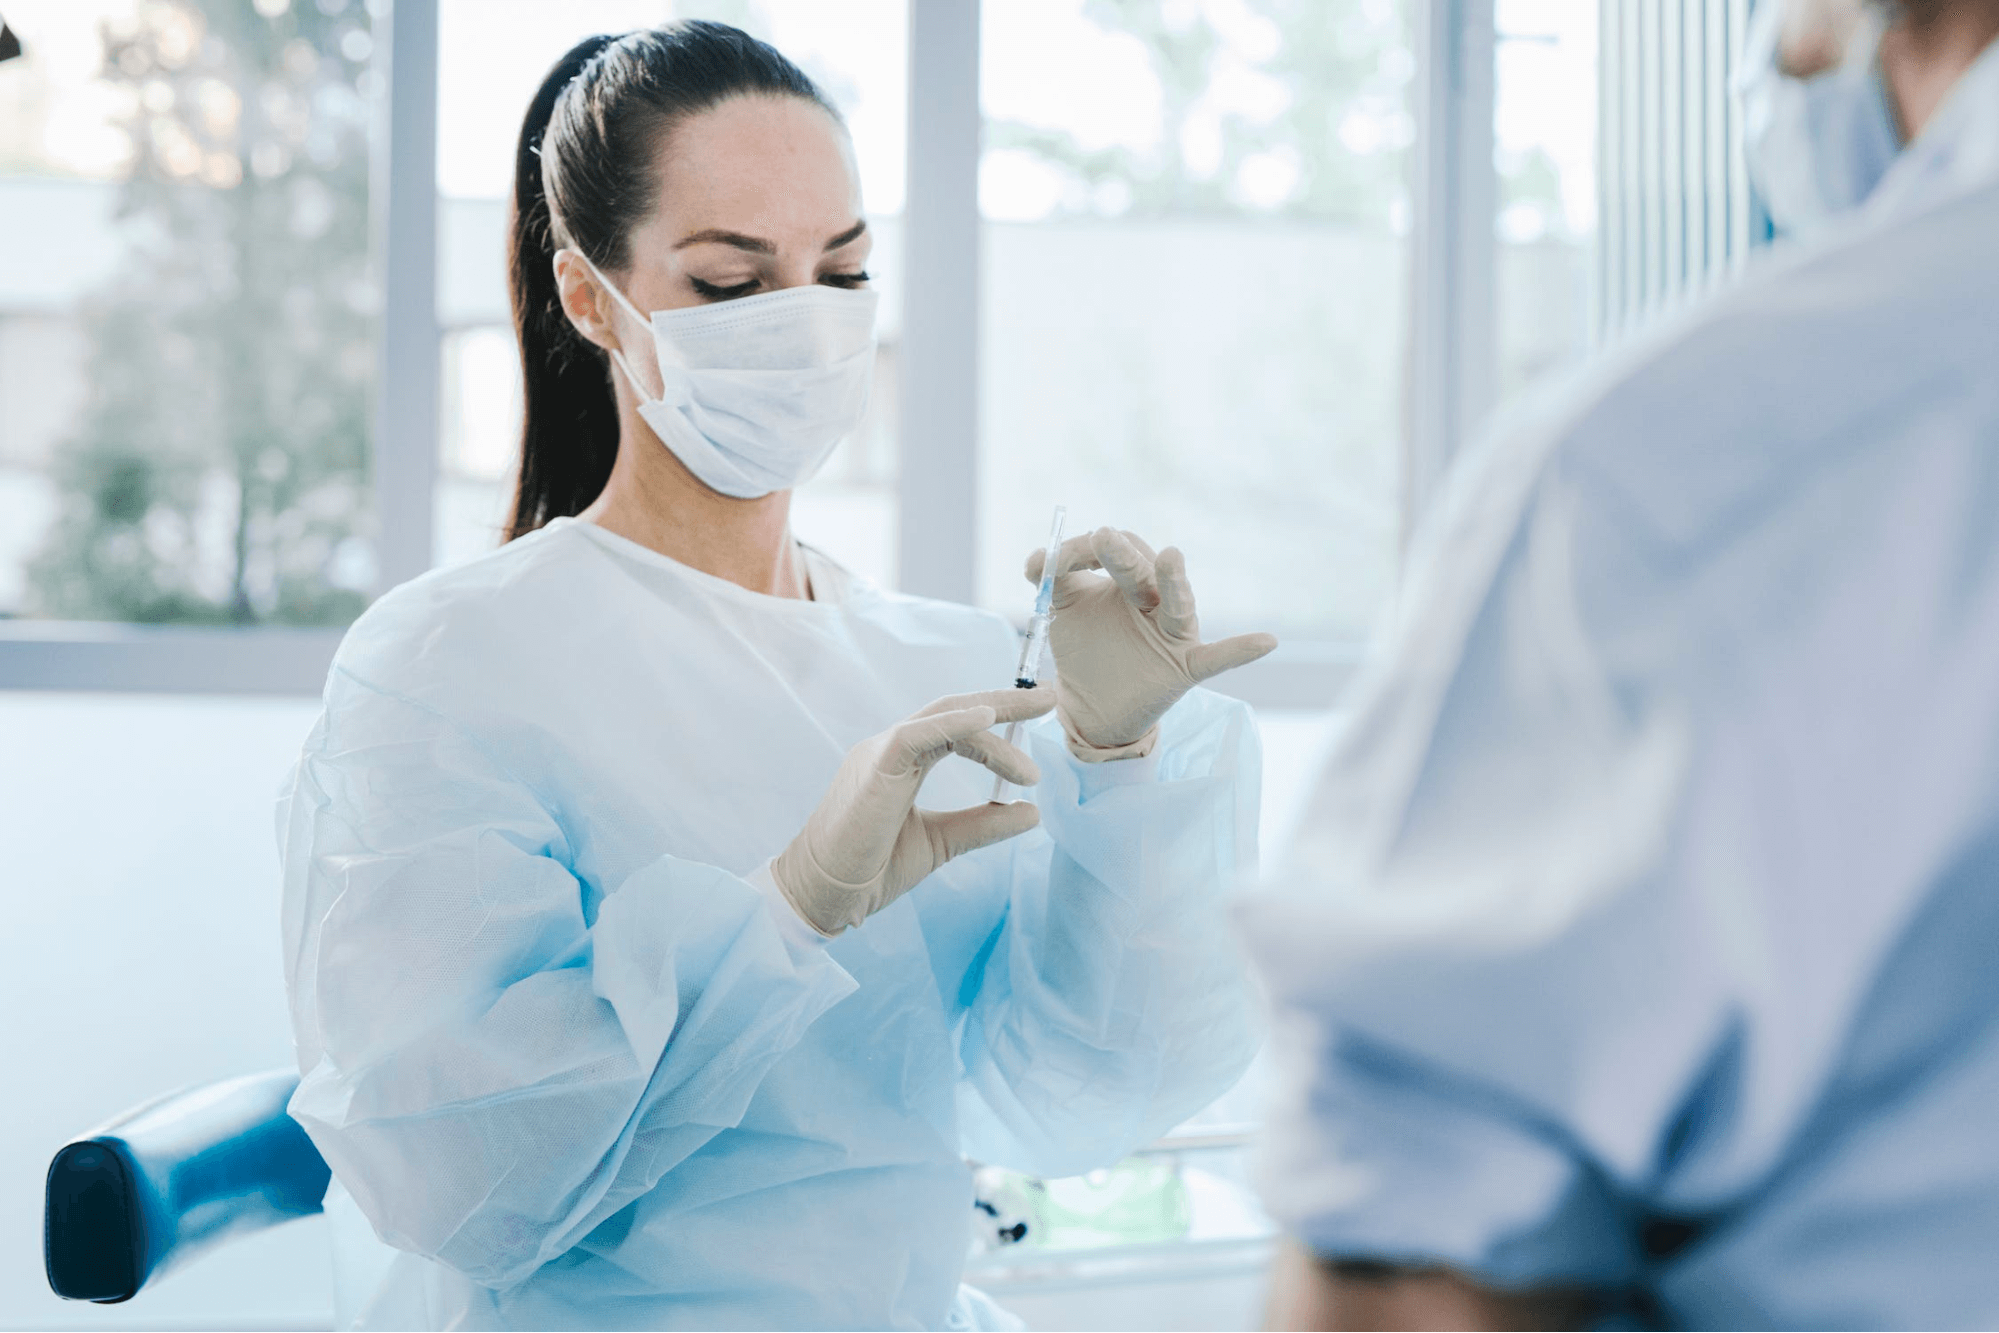 What is the difference between surgical and isolation gowns?